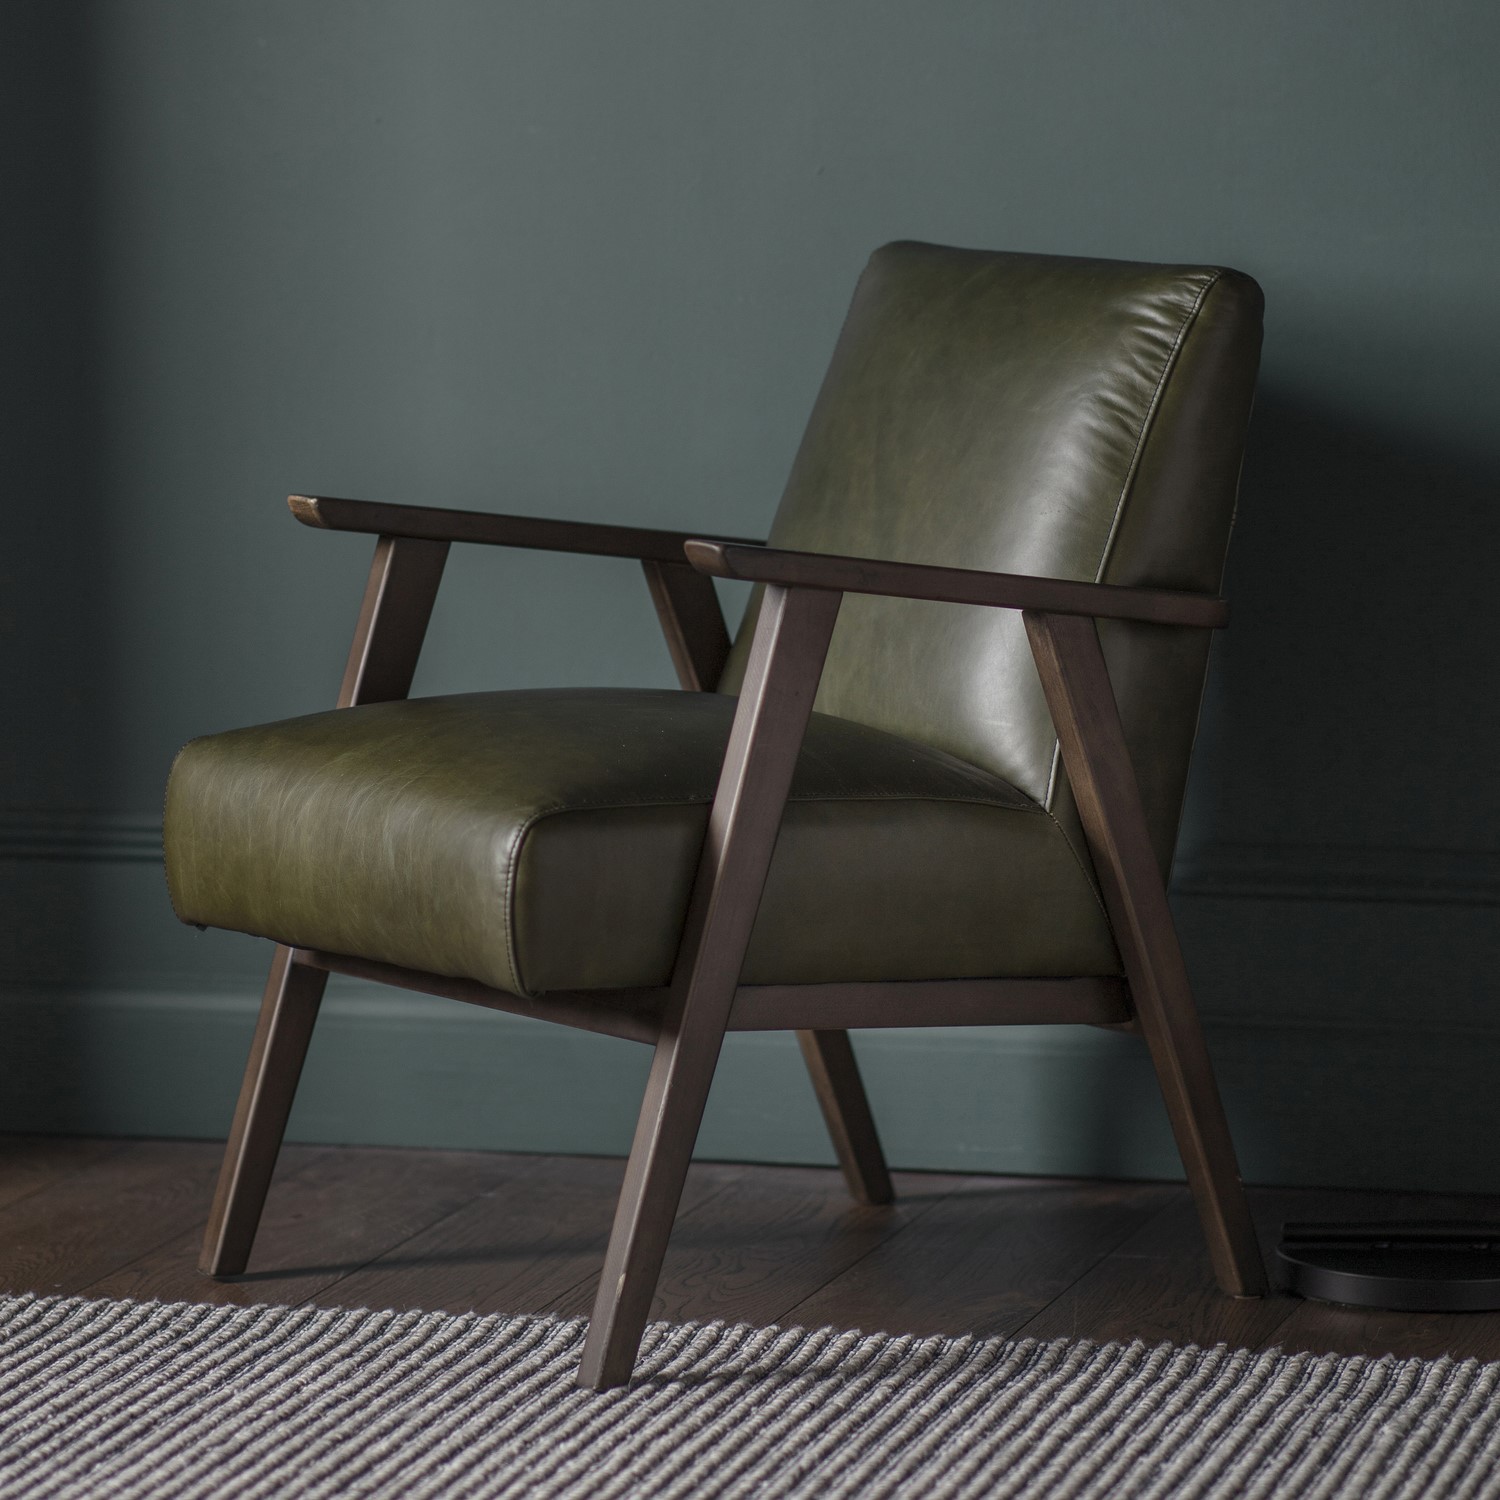 Photo of Green leather armchair with dark wood frame - caspian house